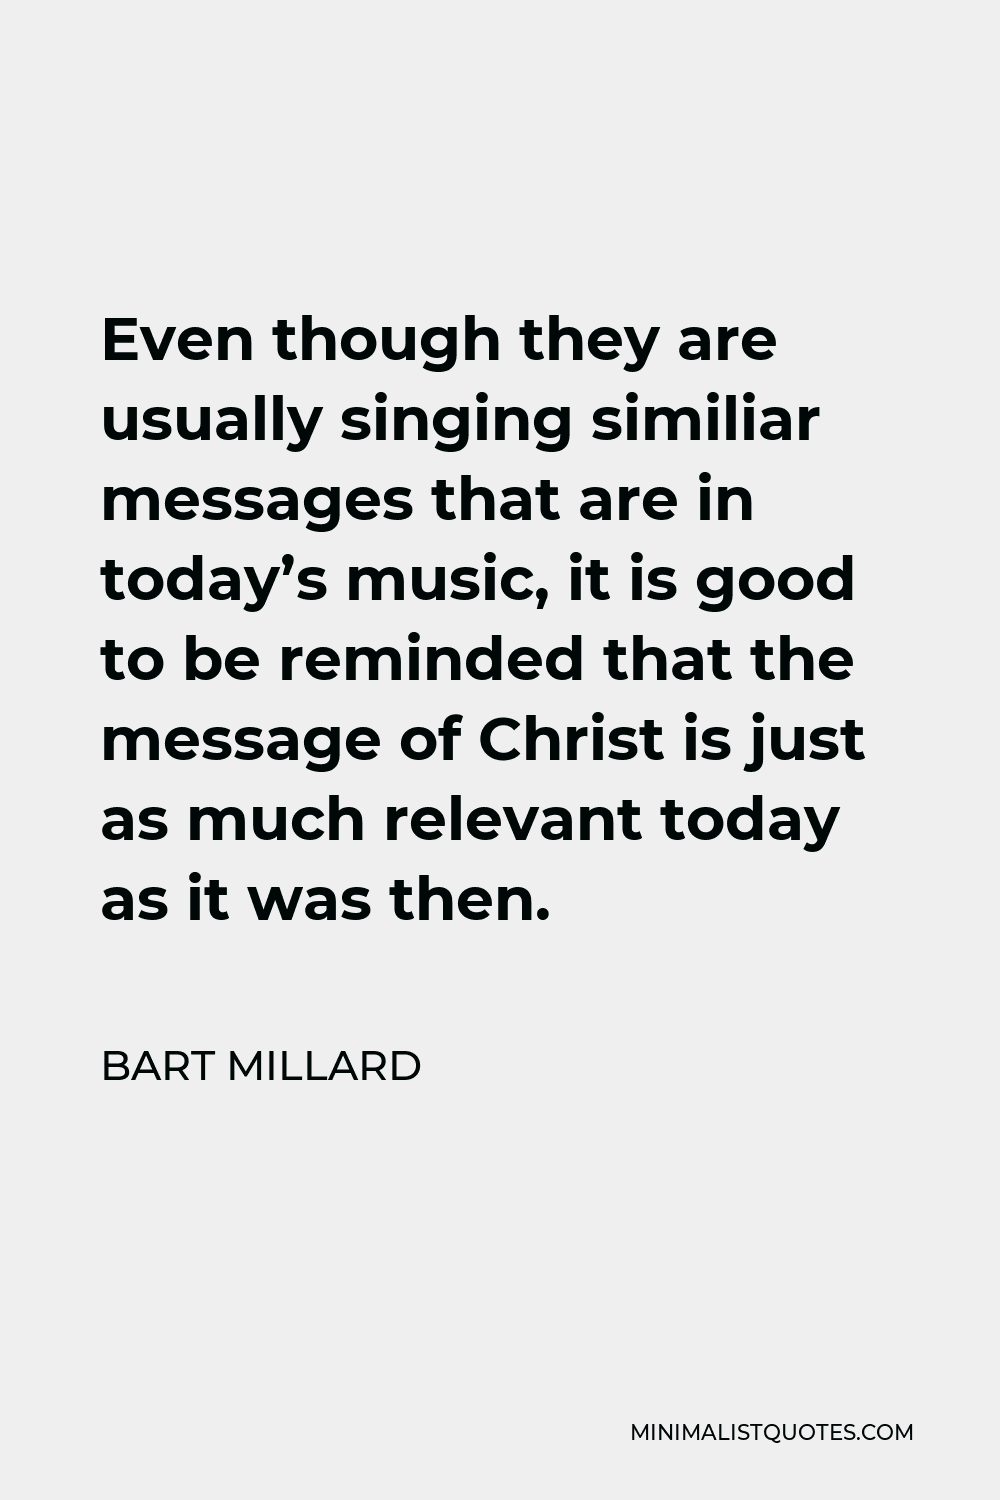 Bart Millard Quote - Even though they are usually singing similiar messages that are in today’s music, it is good to be reminded that the message of Christ is just as much relevant today as it was then.